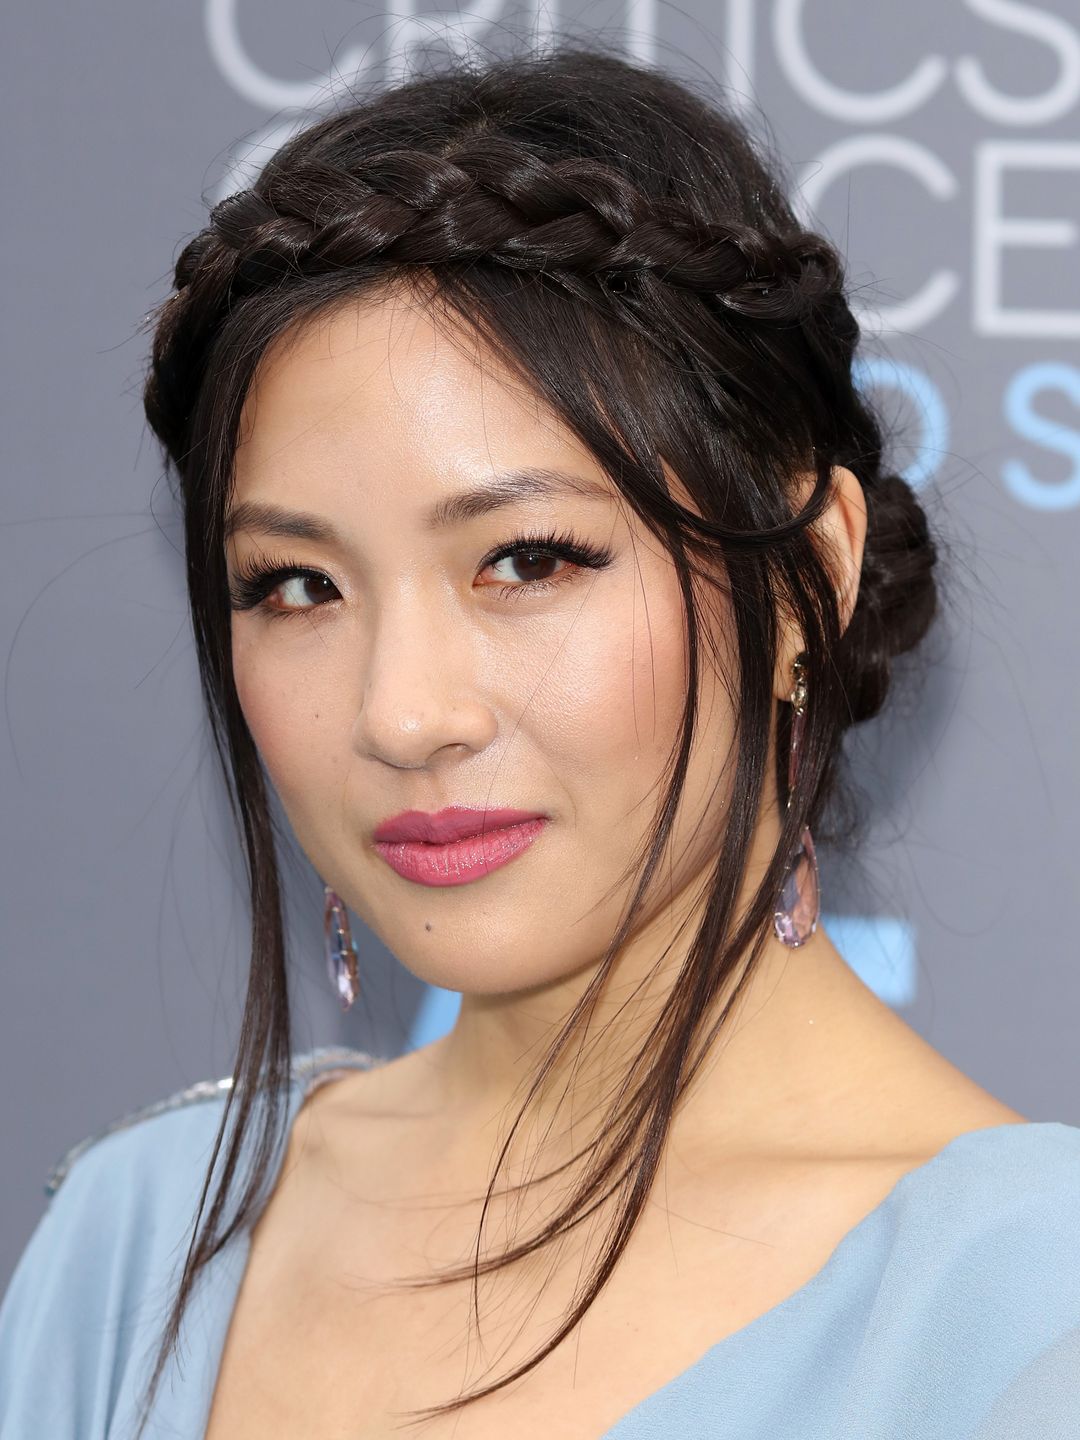 Constance Wu early childhood